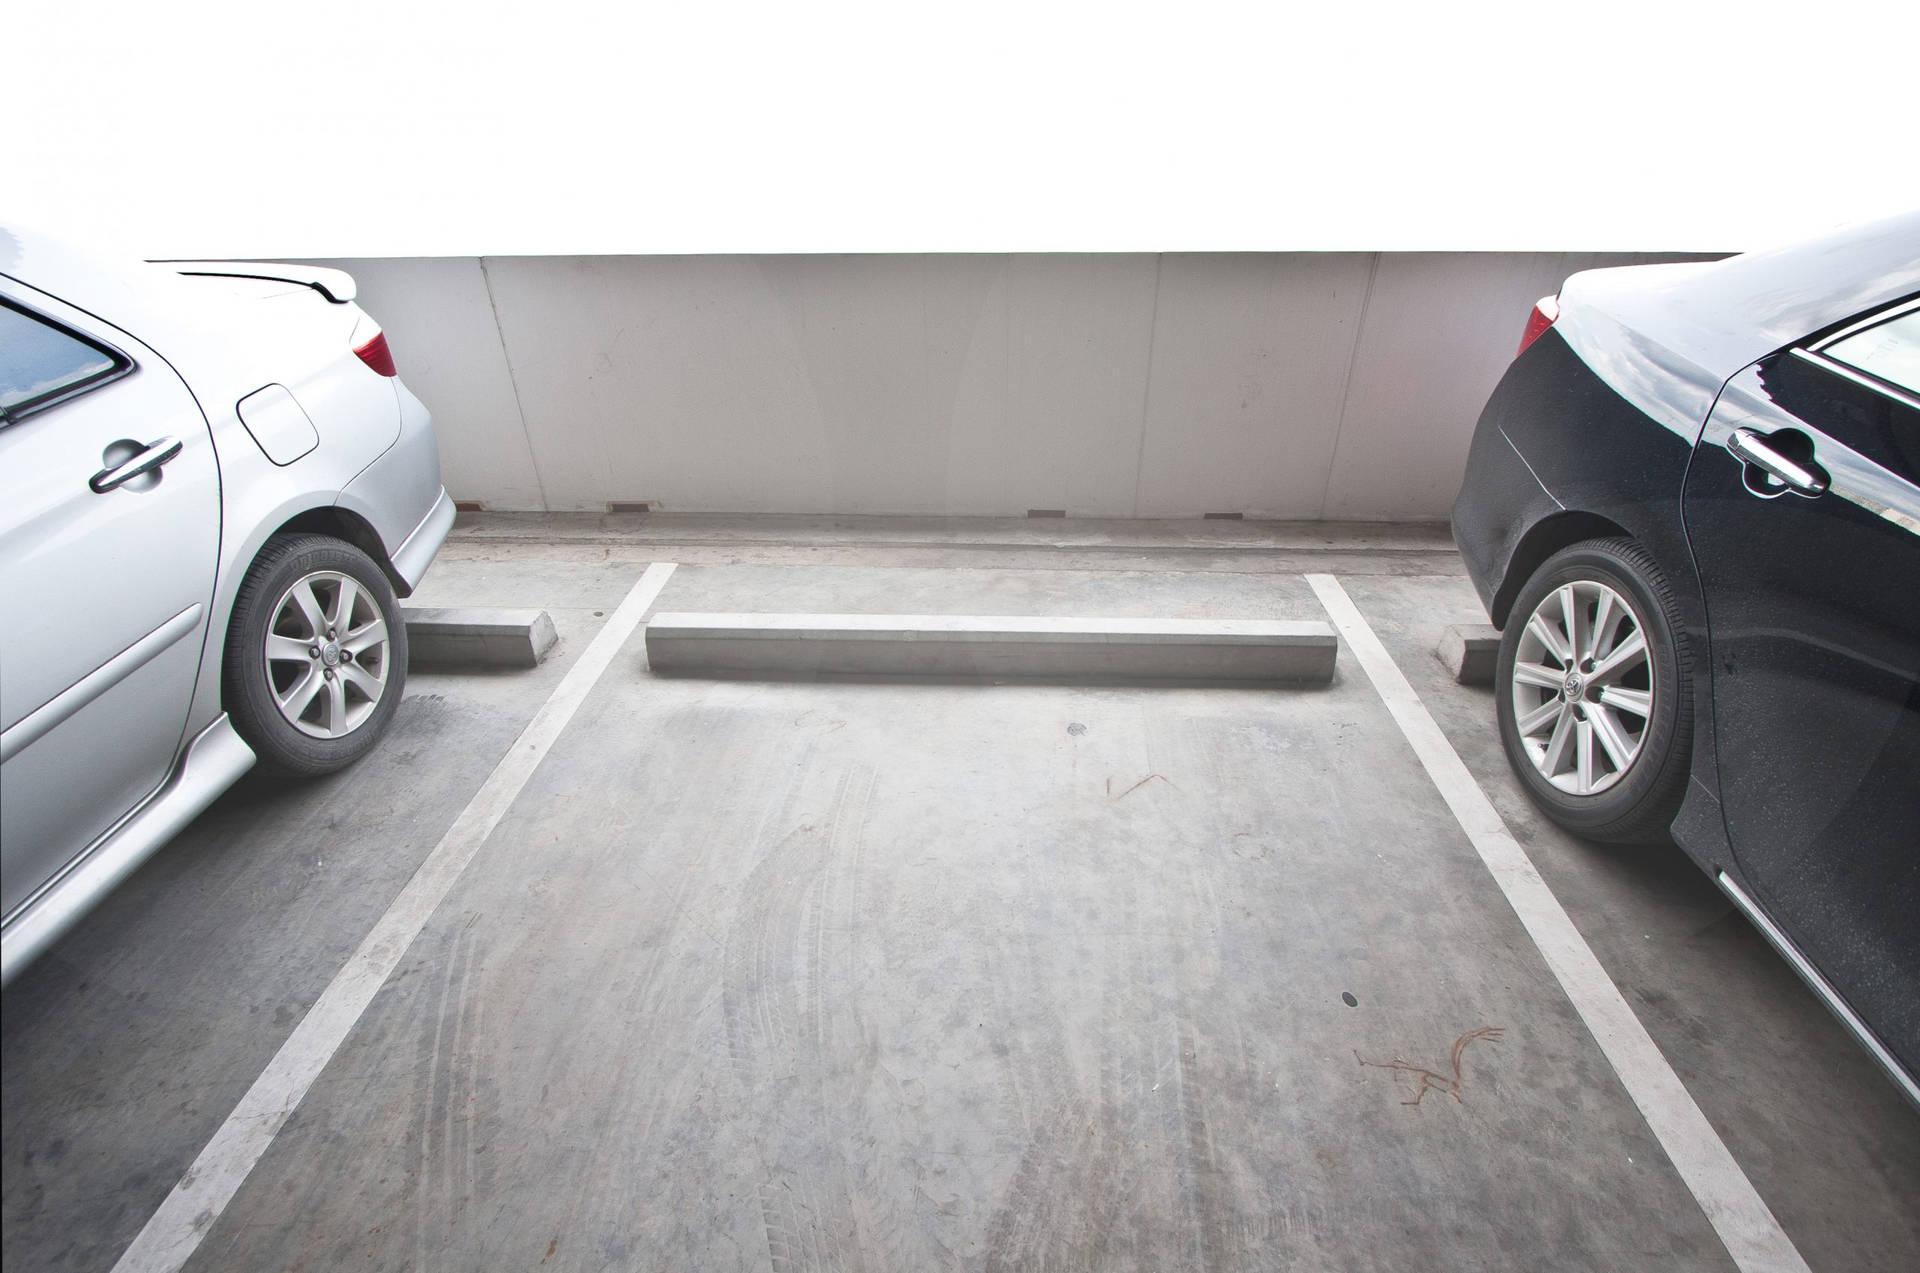 Available Parking Slot Between Two Cars